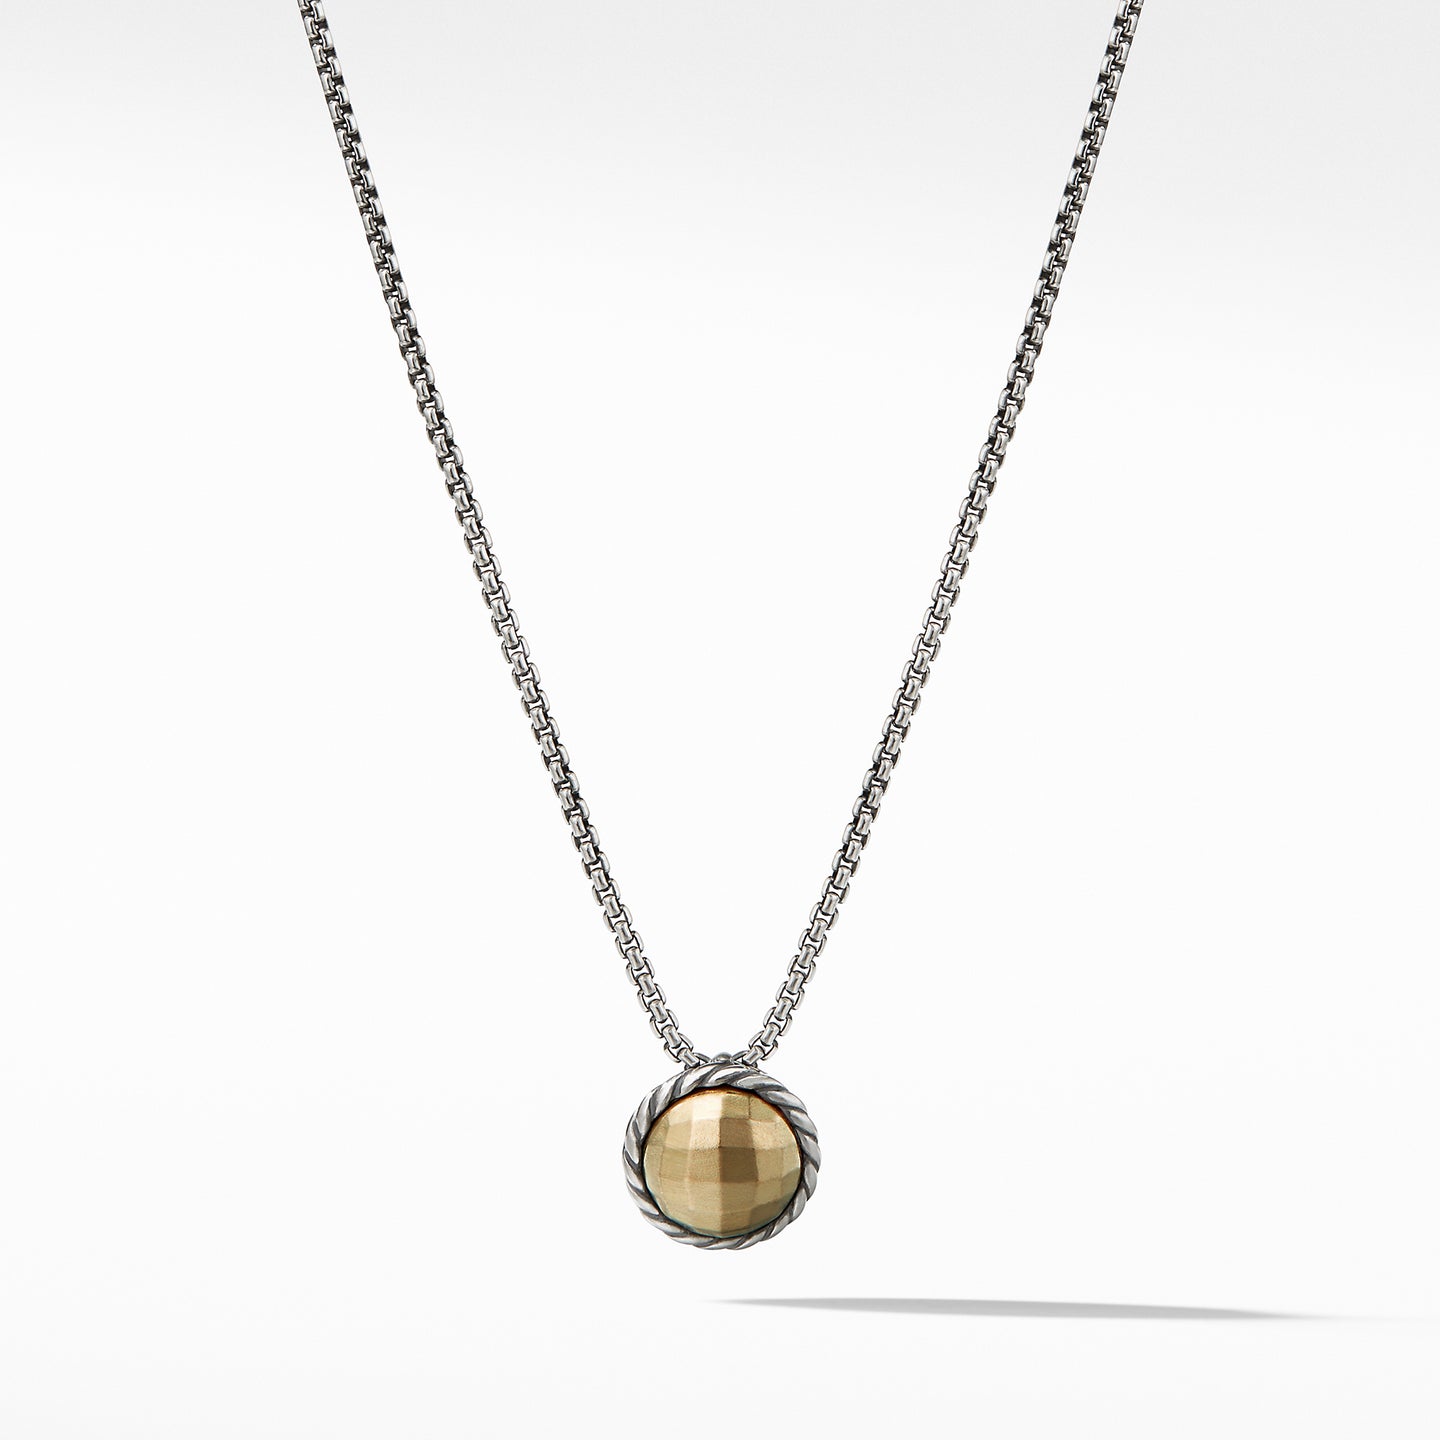 Necklace with Gold Dome and 18K Gold, 17